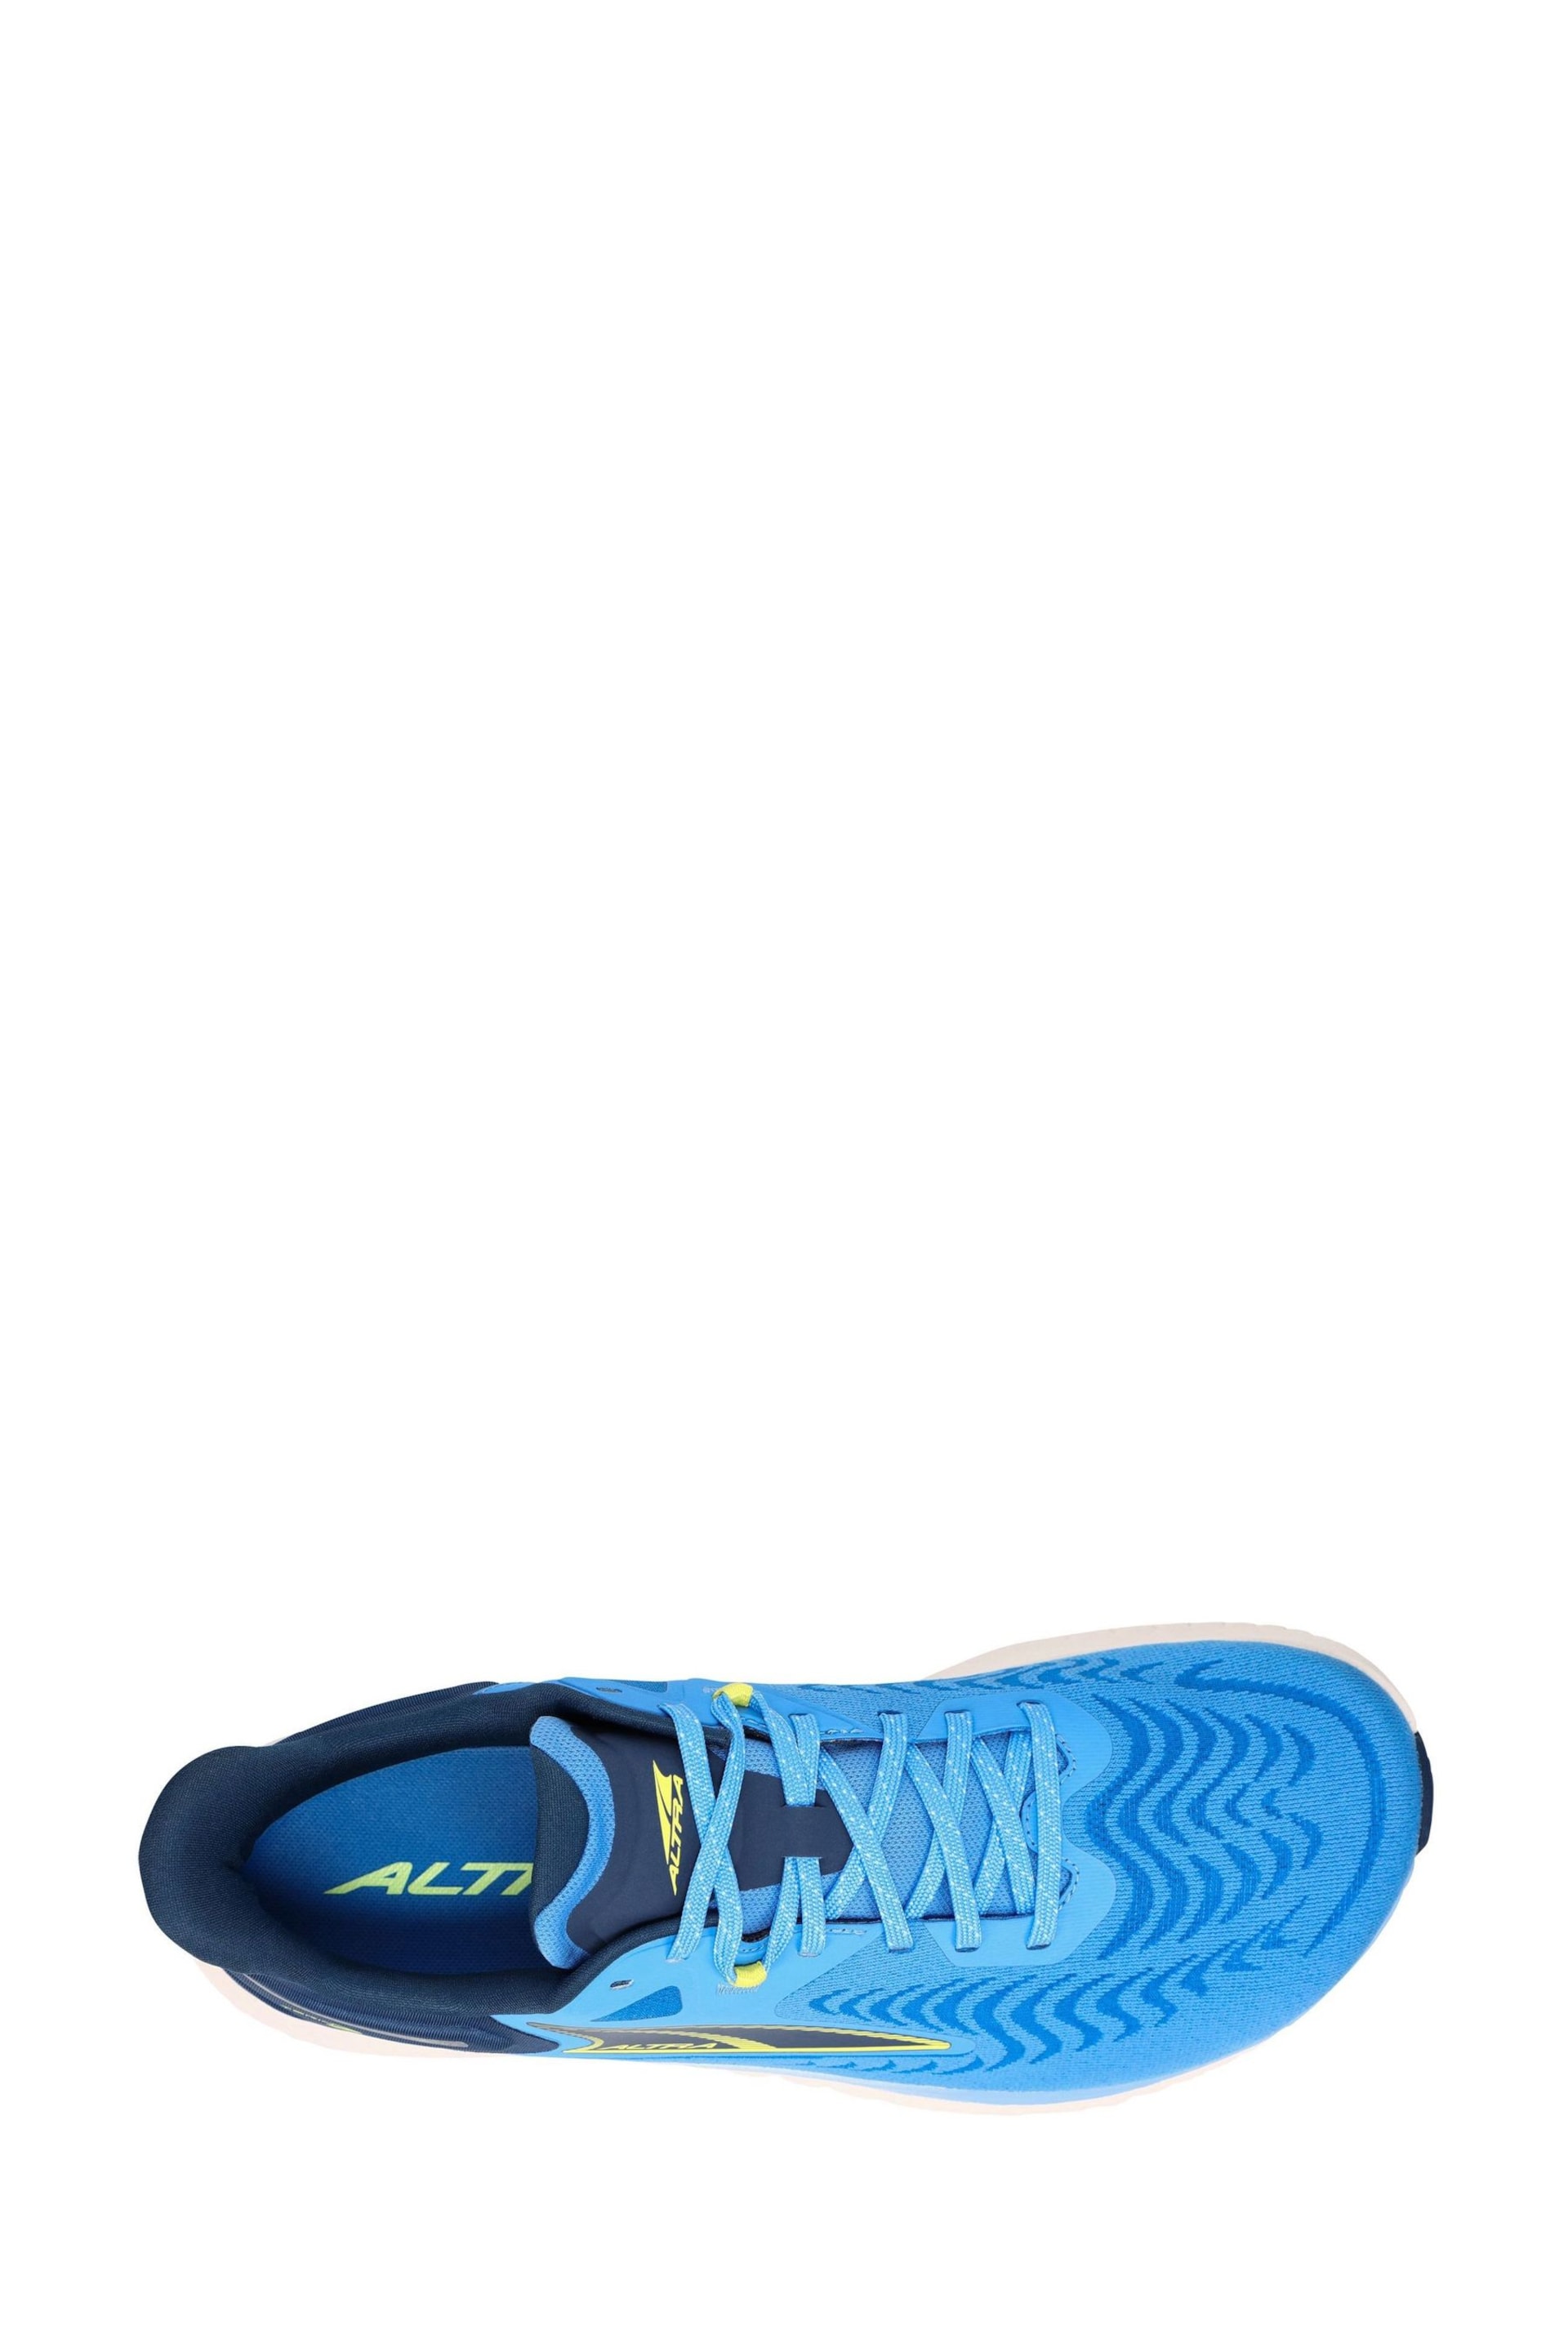 Altra Mens Torin 7 Trainers - Image 3 of 5